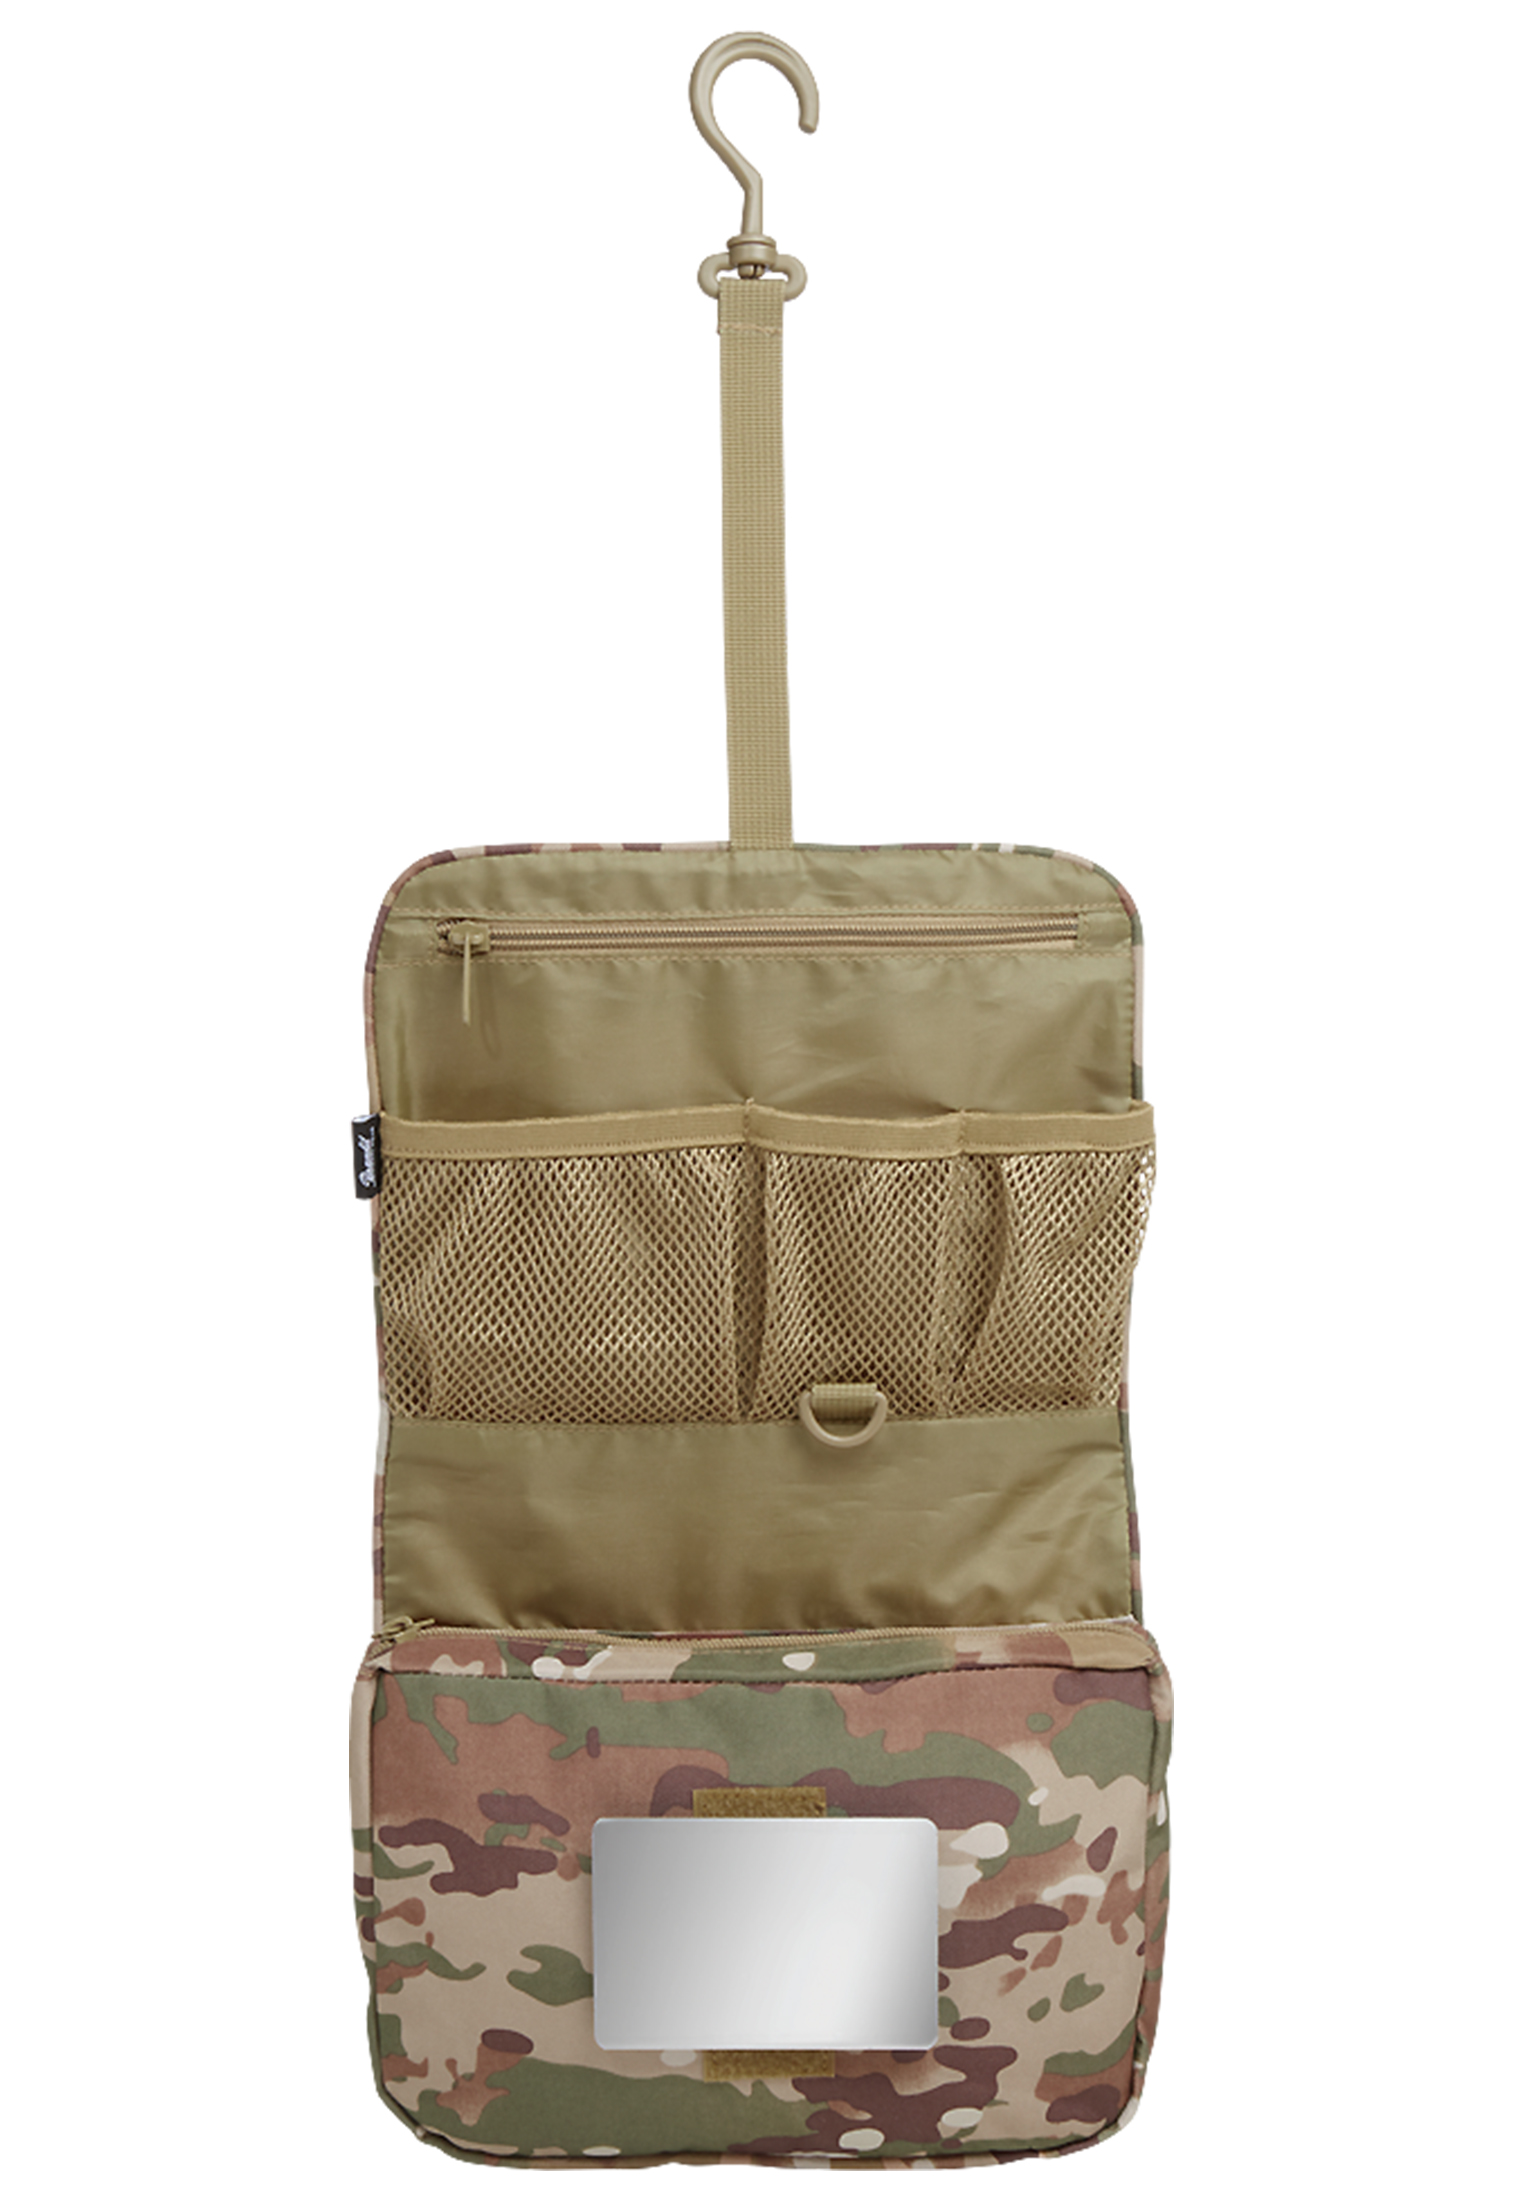 Taschen Toiletry Bag large in Farbe tactical camo